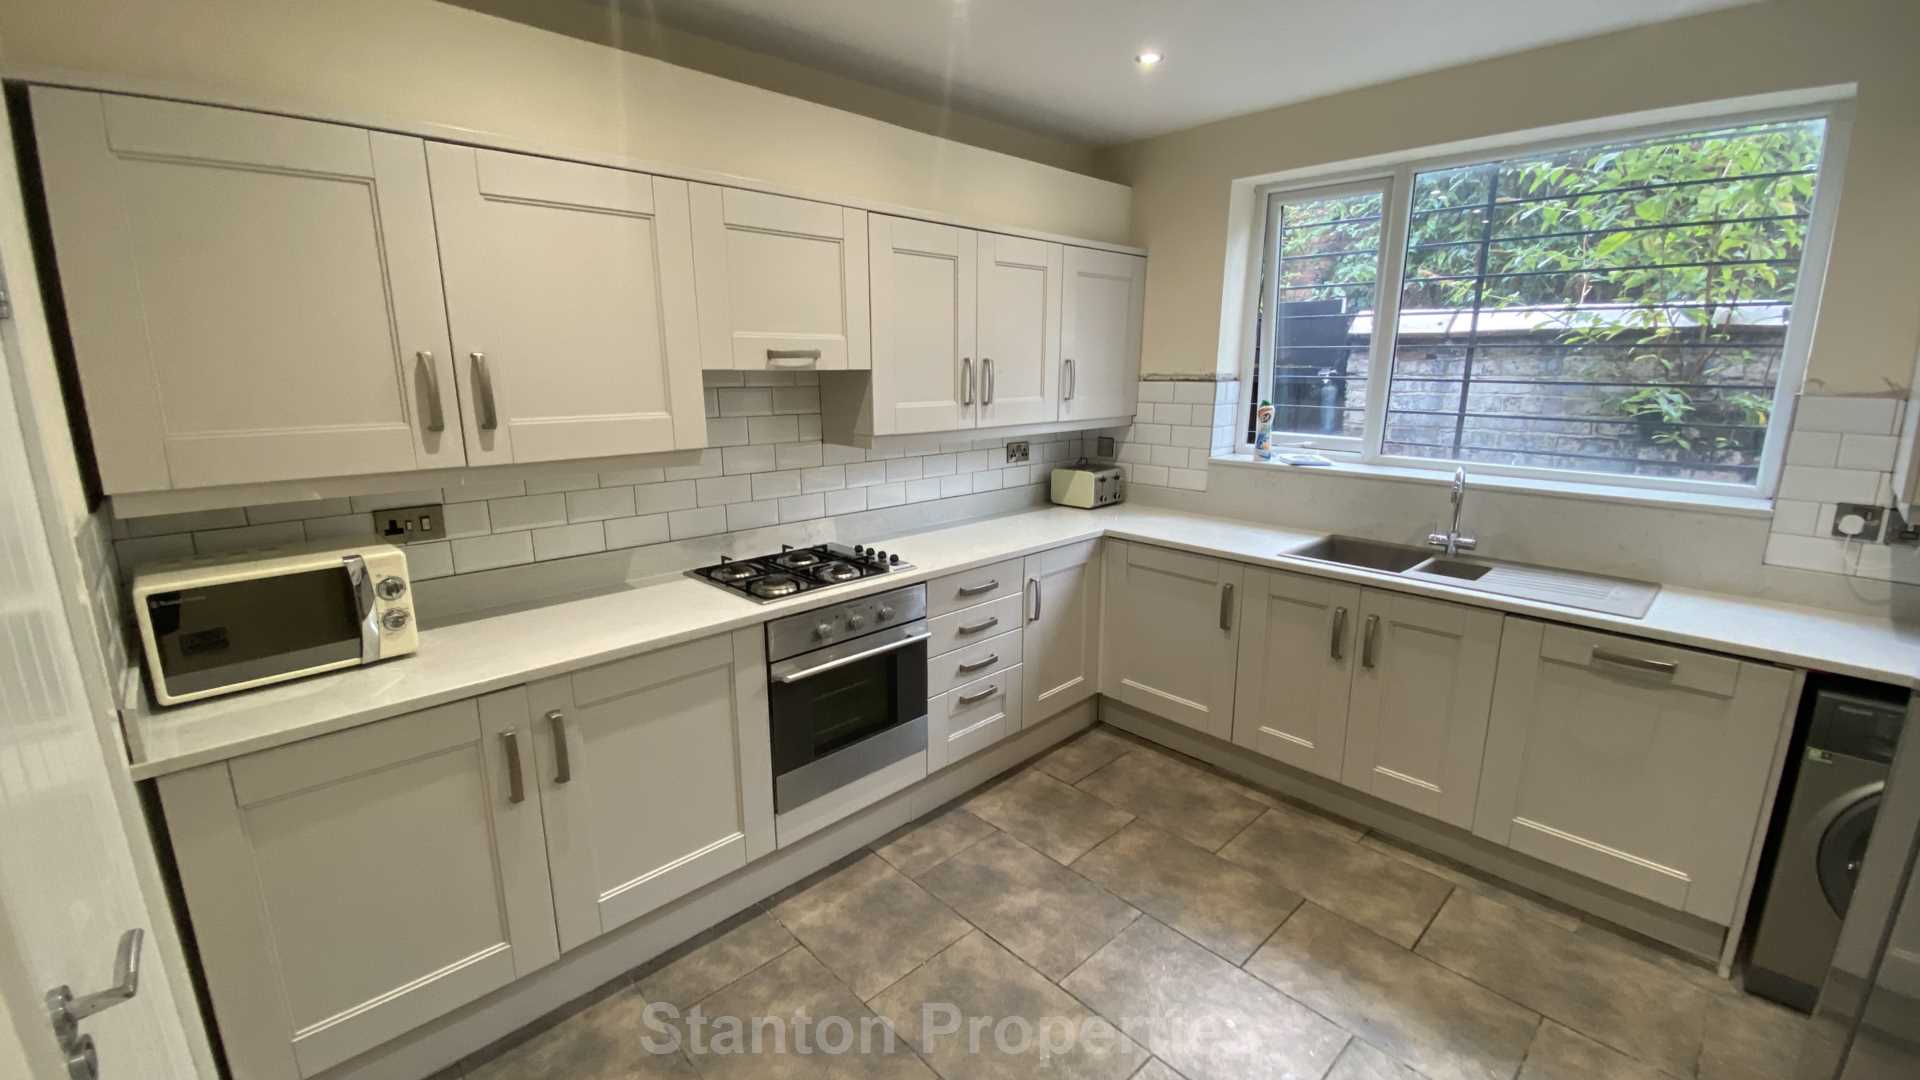 £130 pppw, Moseley Road, Fallowfield, M14 6NR, Image 1